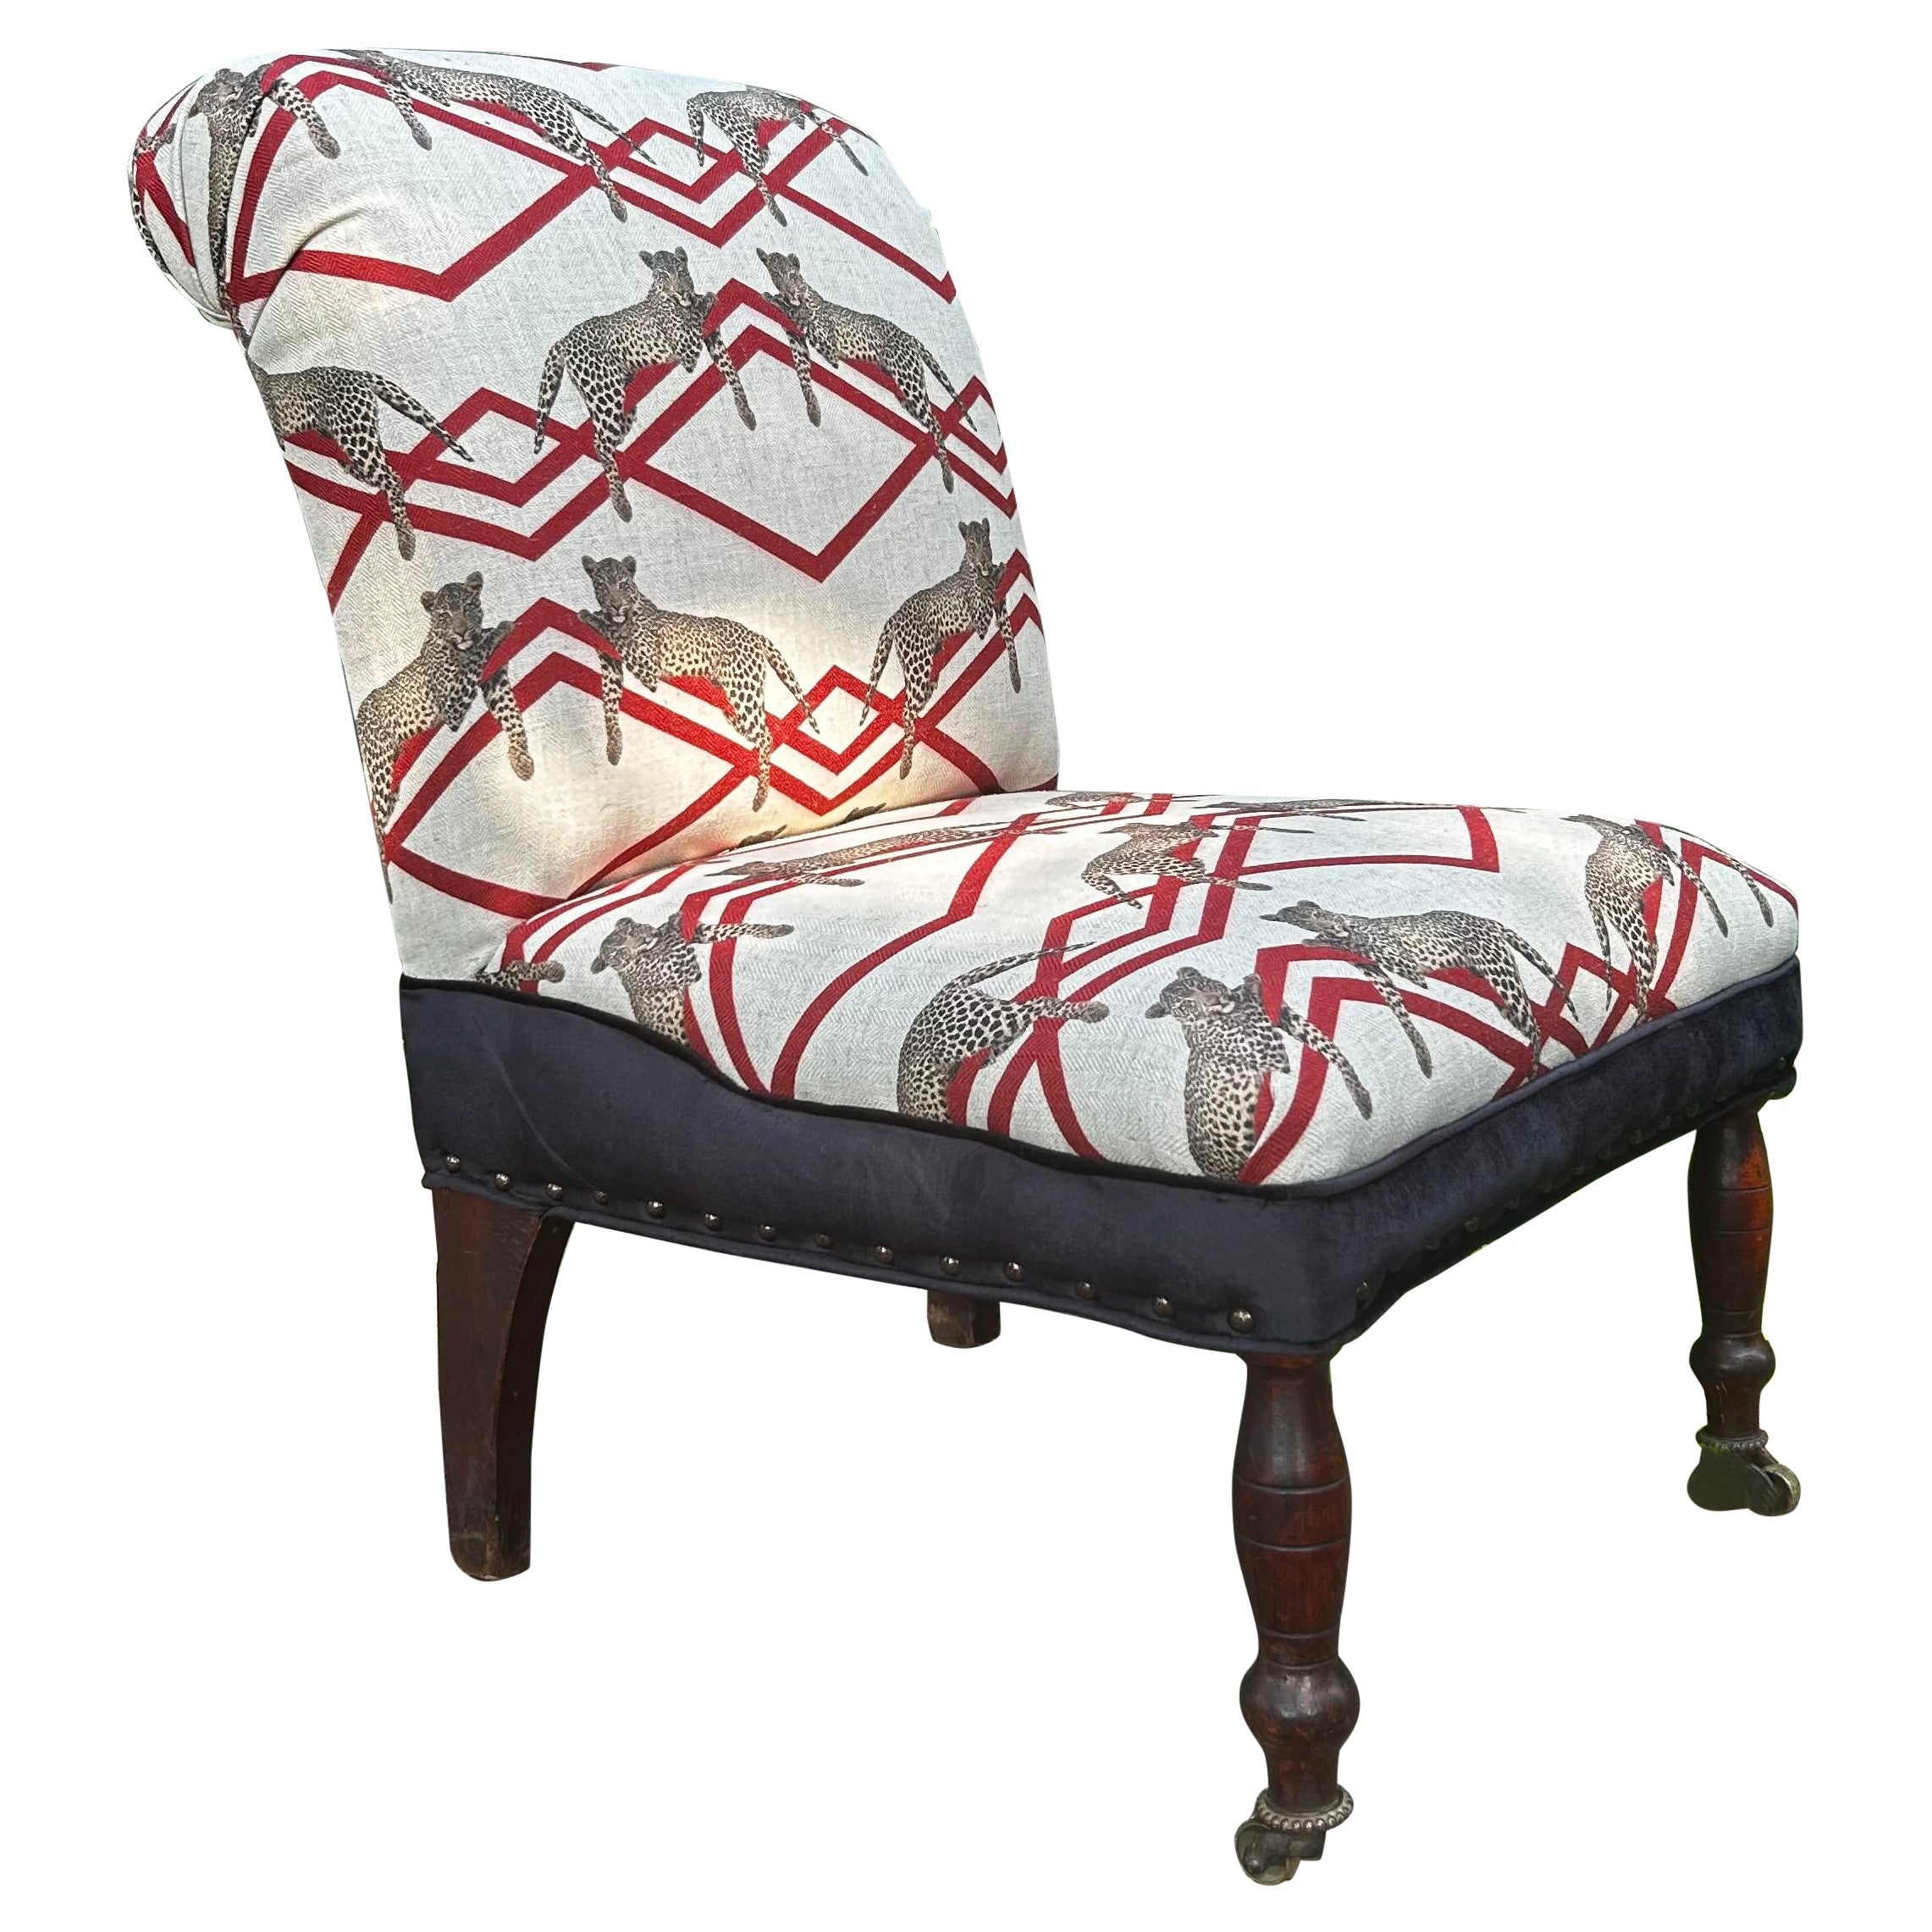 Rolled Back Slipper Chair - Animal and Geometric Print